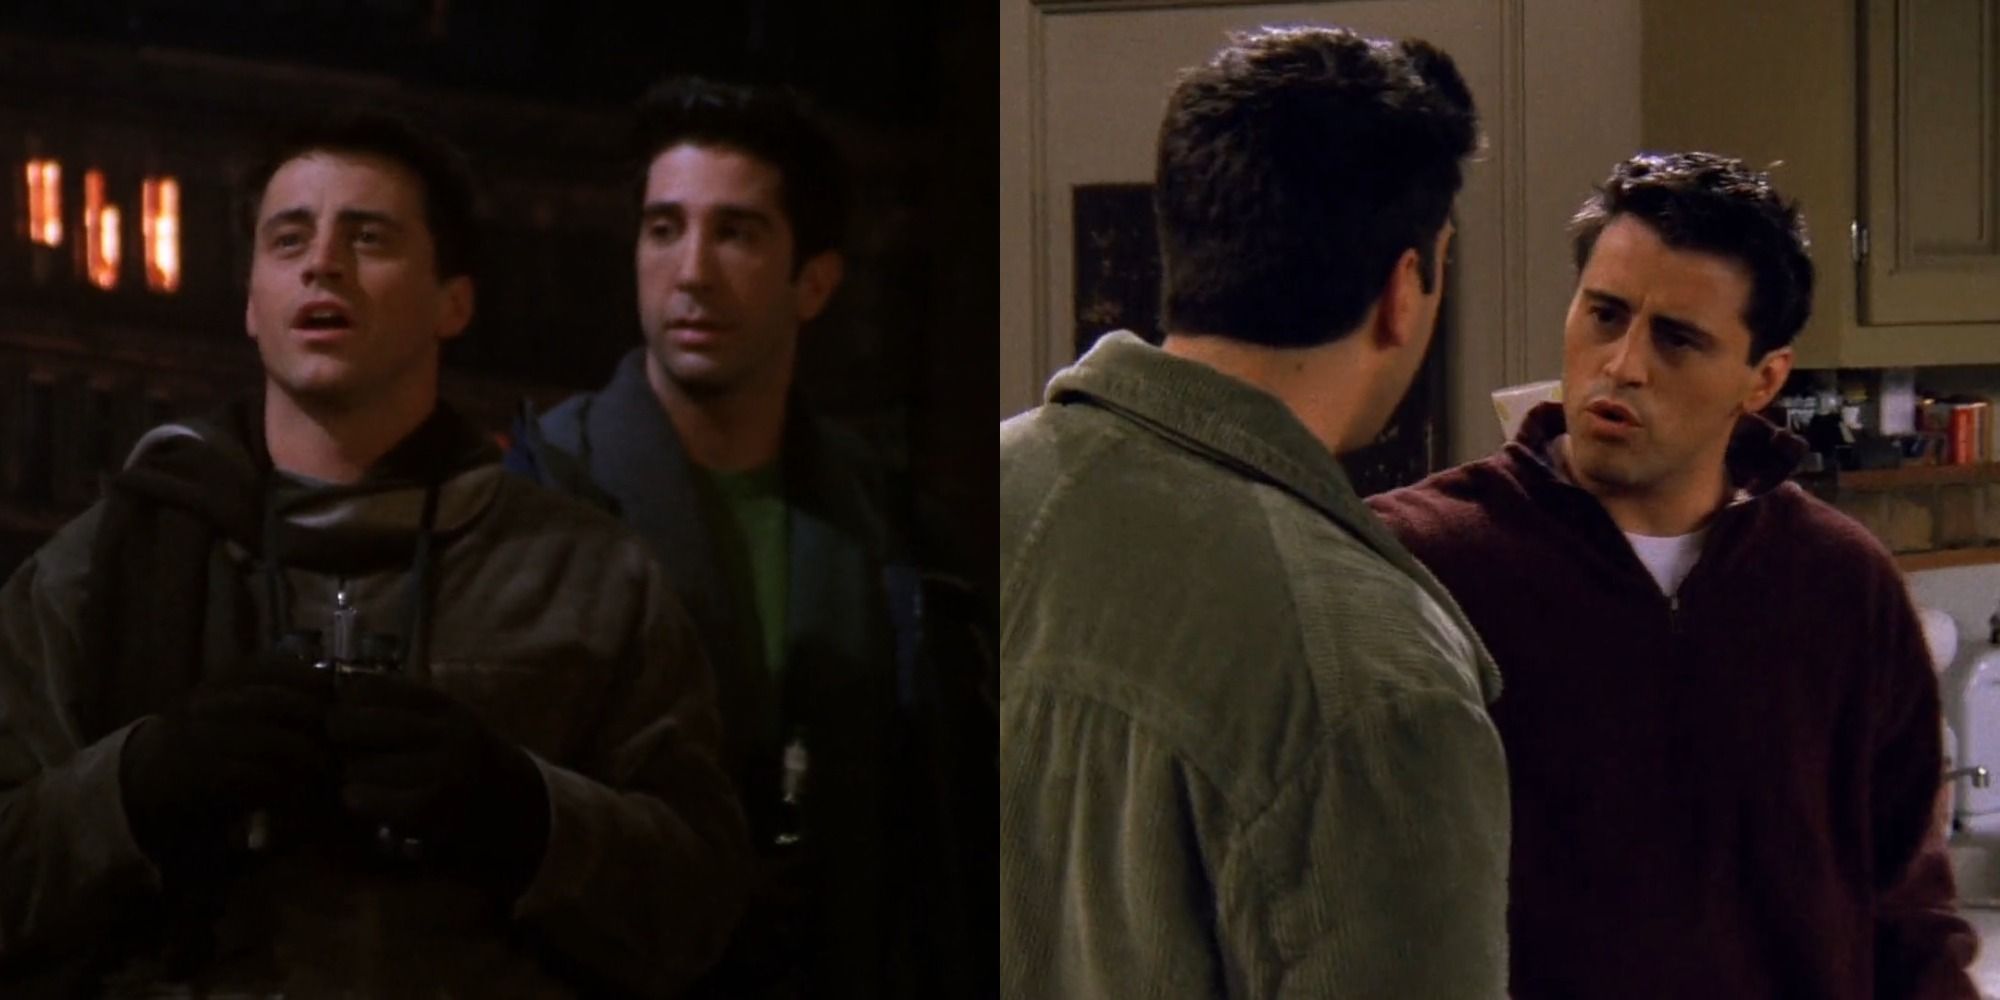 A split image showing Joey and Ross from Friends